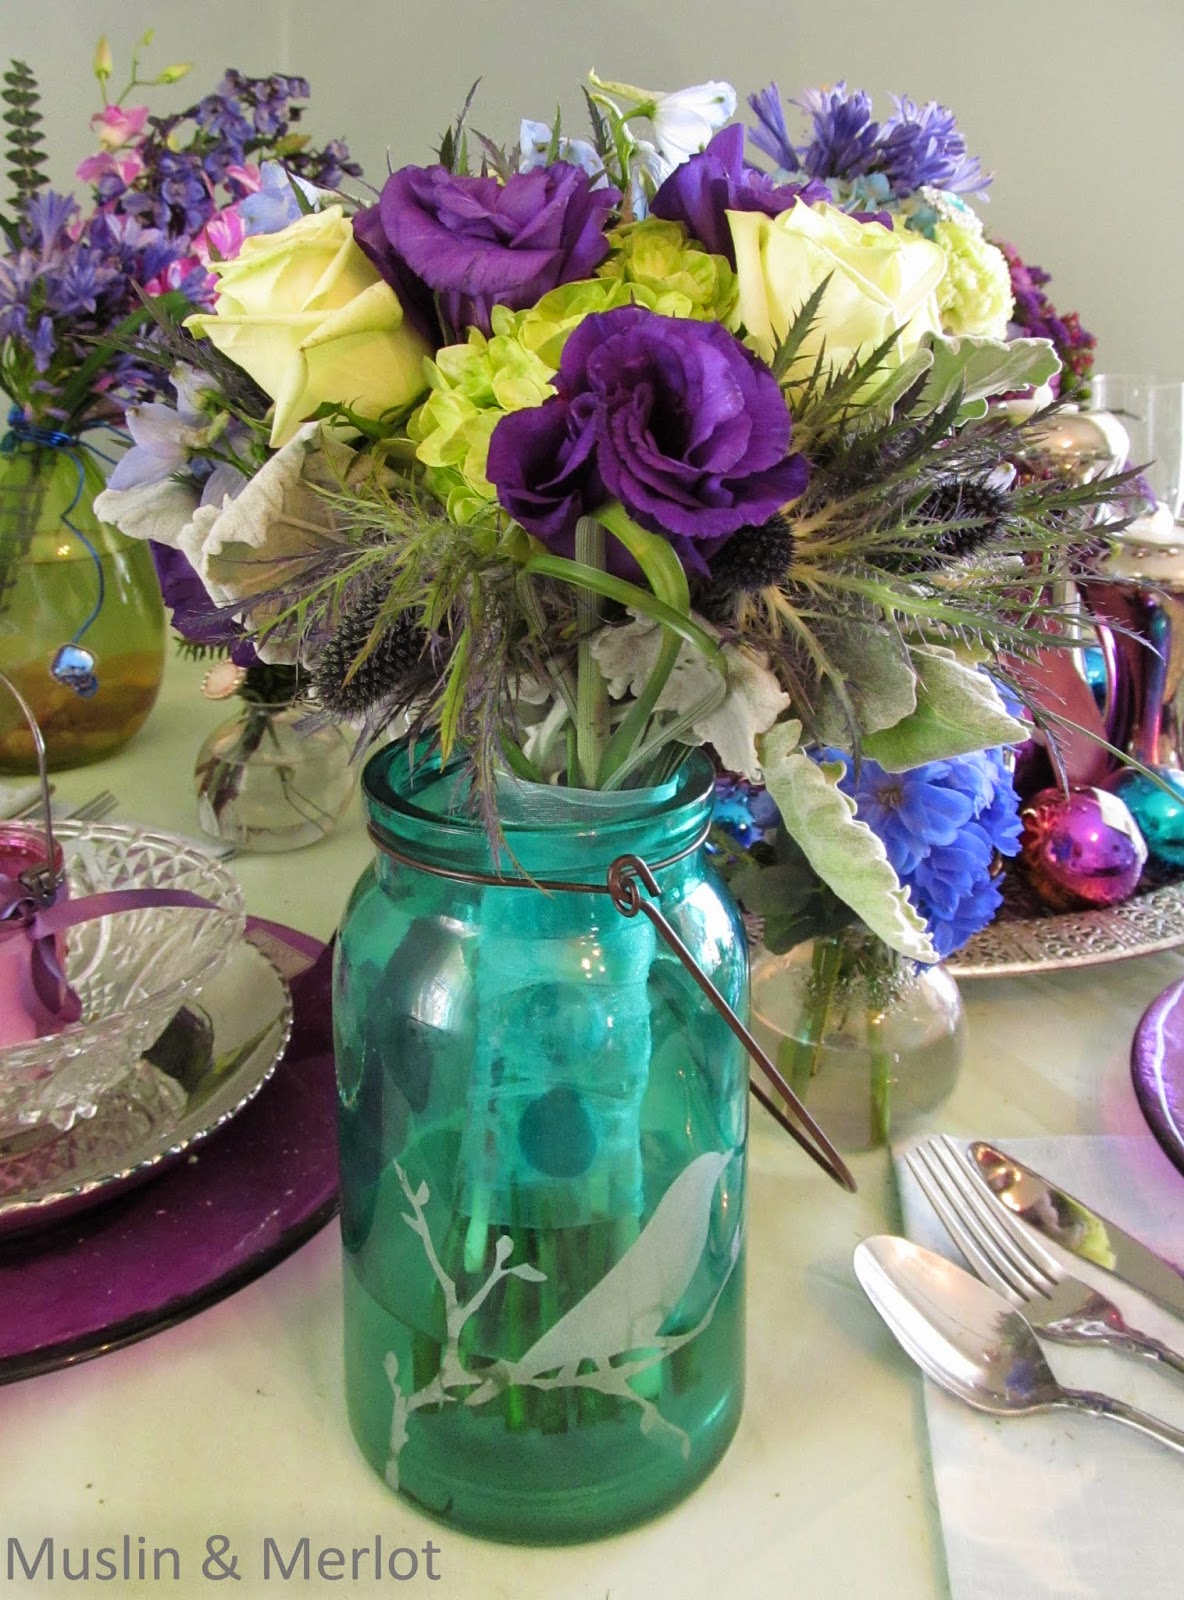 Stems wrapped in ribbon, placed in painted jar. Very pretty.